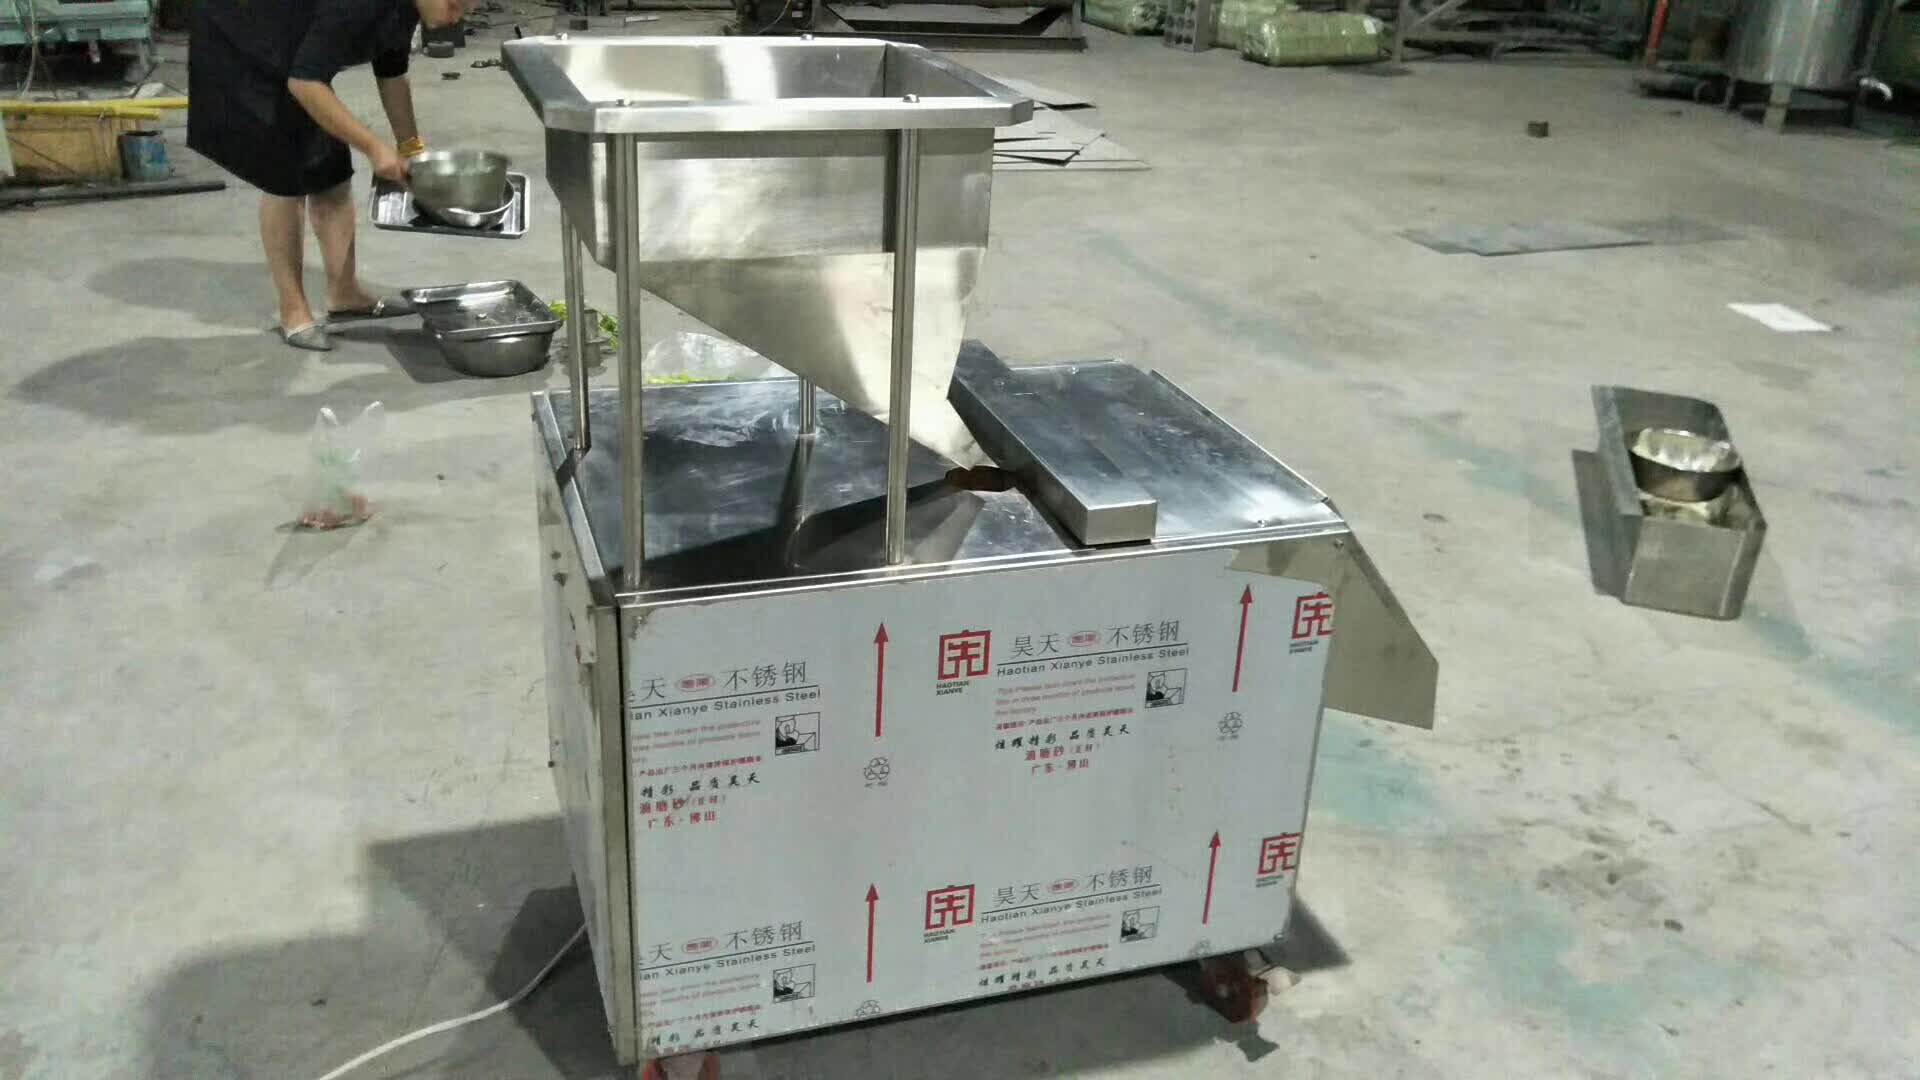 Stainless Steel Almond Flakes Cutting Machine